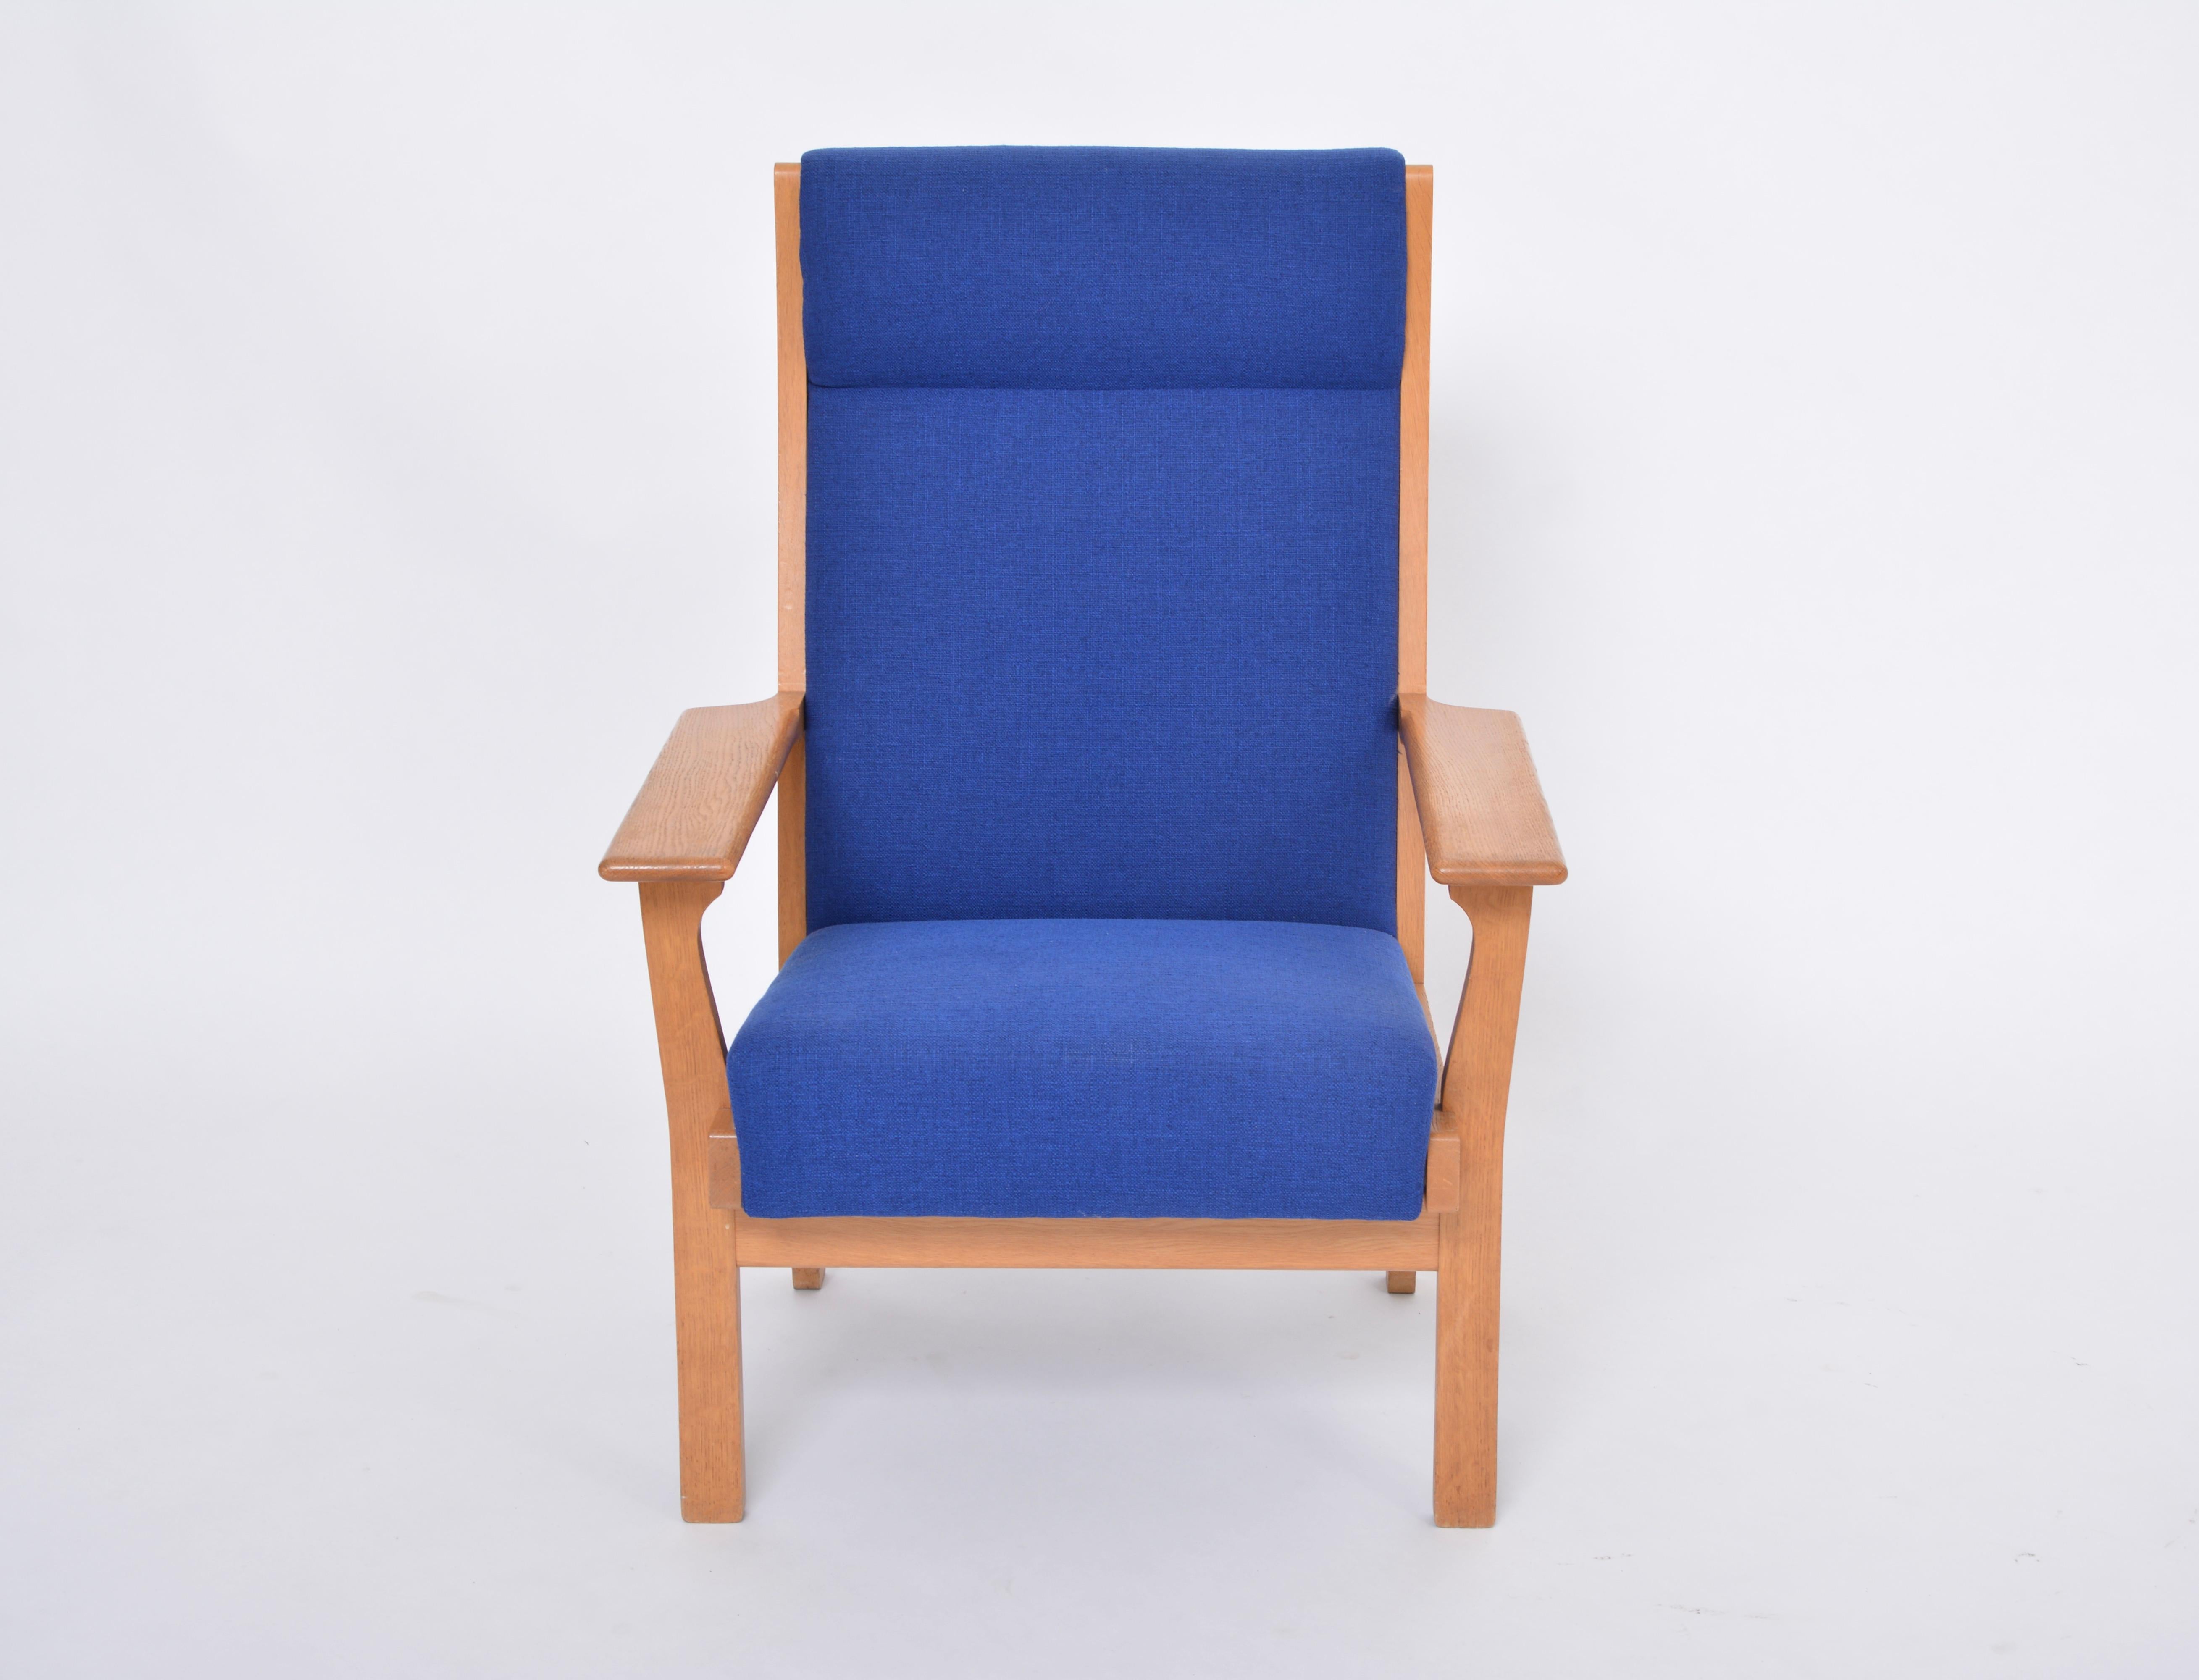 Reupholstered Danish Mid-Century Modern GE 181 a Chair by Hans Wegner for GETAMA In Good Condition For Sale In Berlin, DE